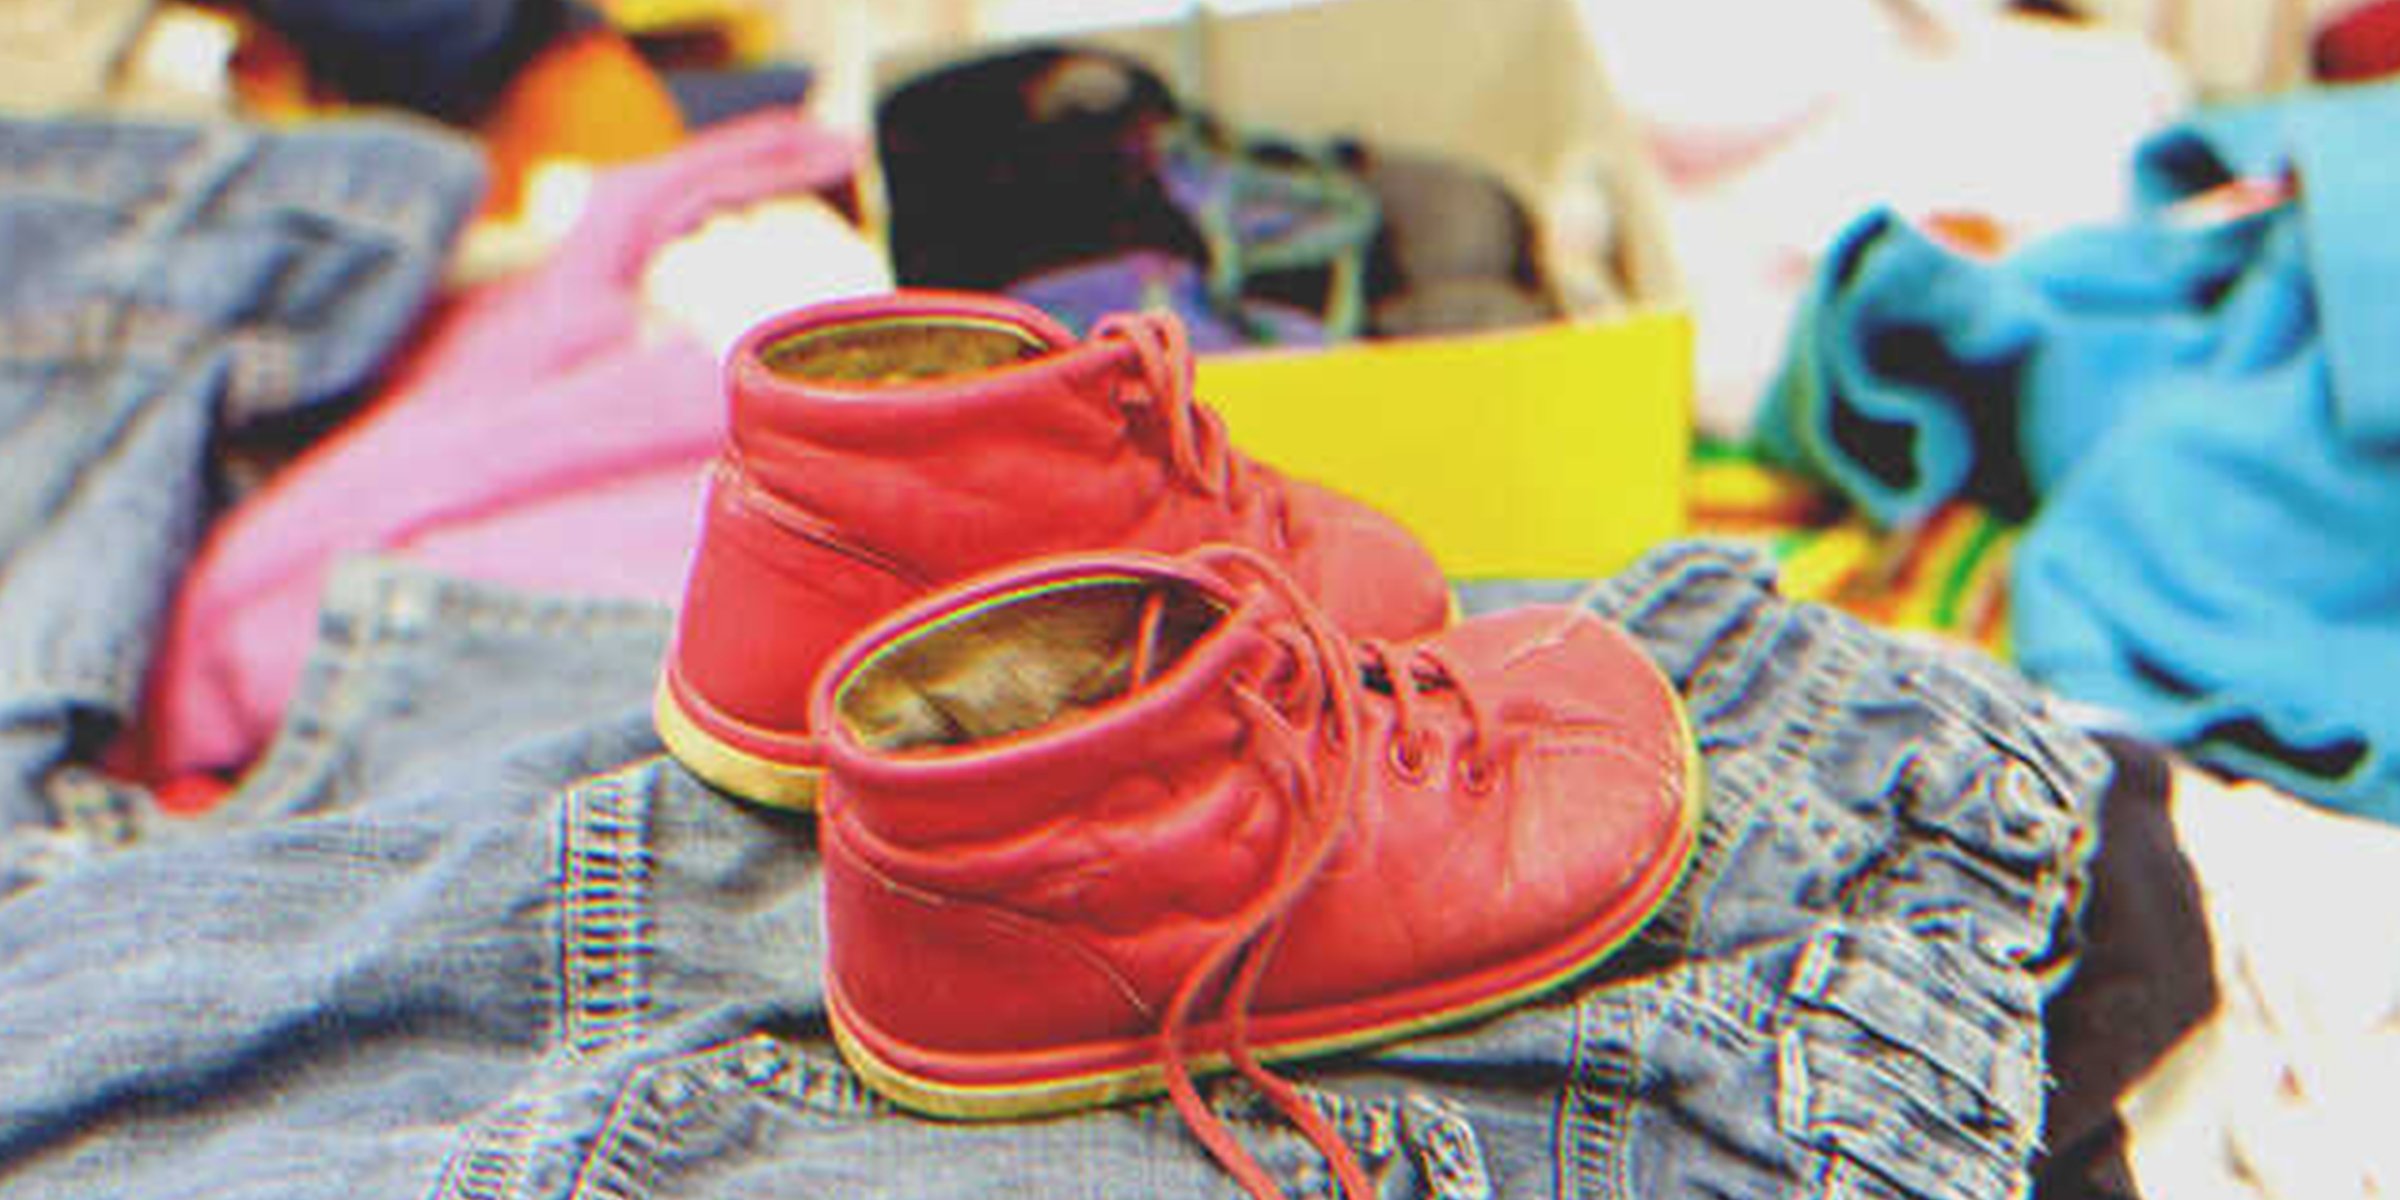 A pair of little red baby shoes | Source: Shutterstock